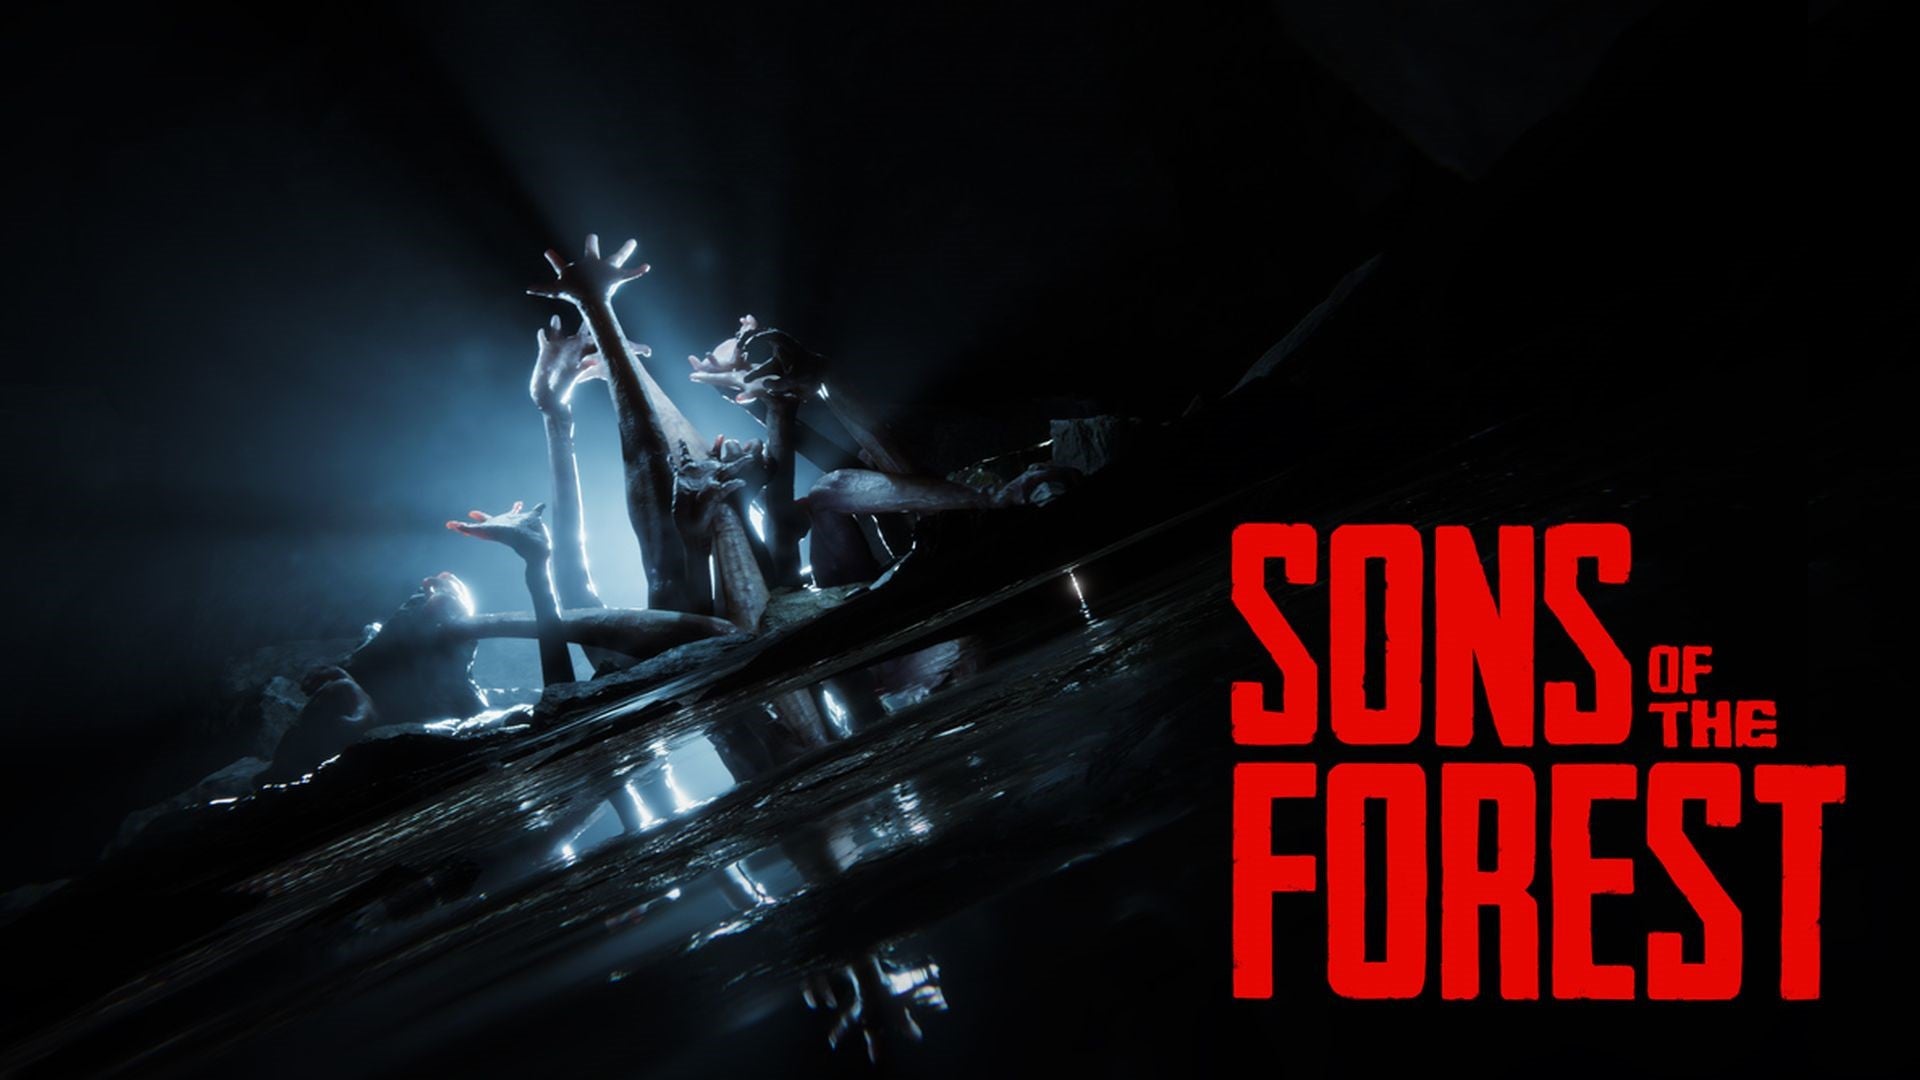 Son of the Forest：A Survival Horror Game with Captivating Plot